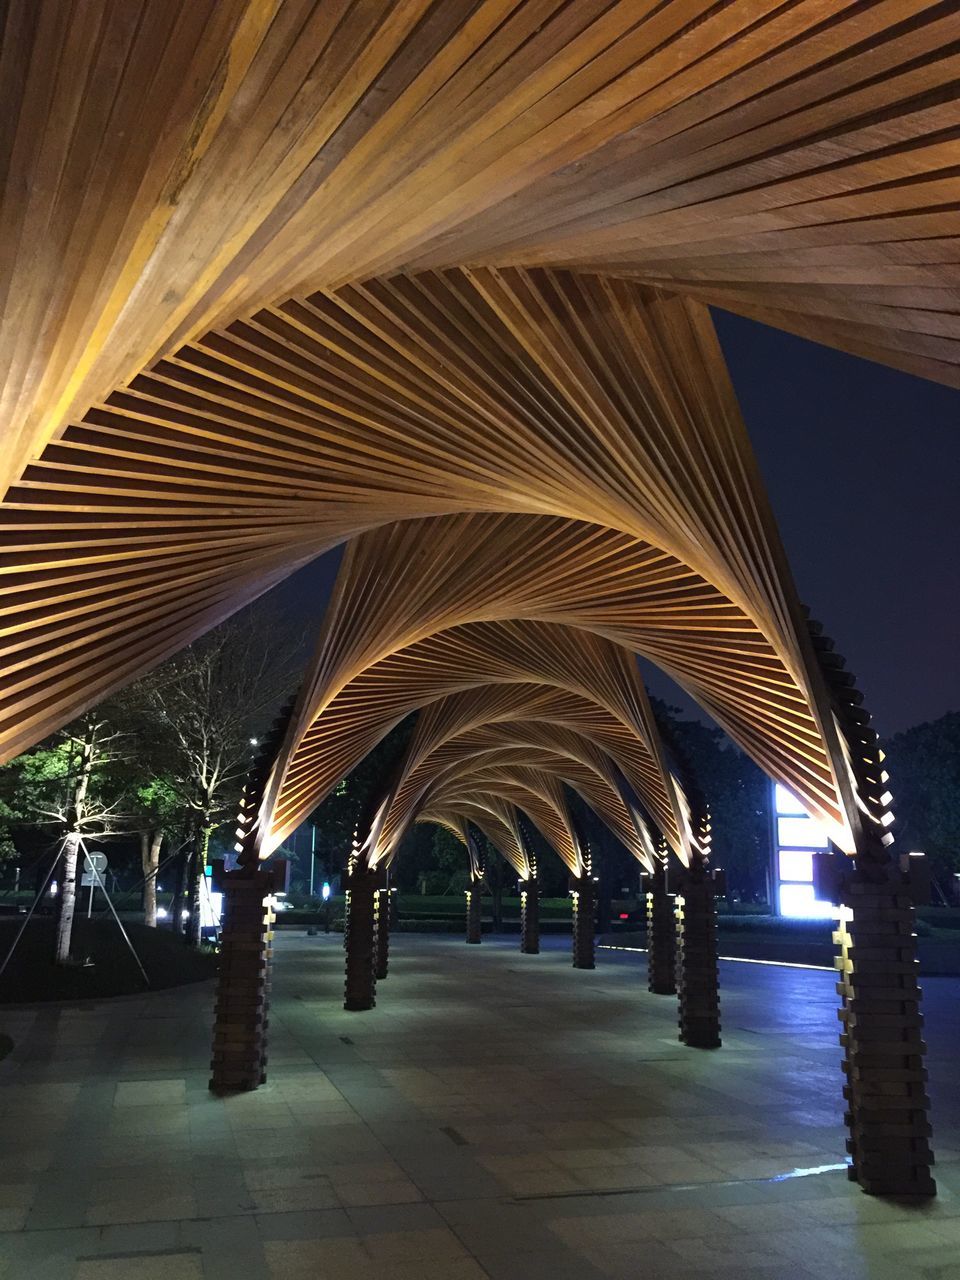 architecture, built structure, the way forward, in a row, diminishing perspective, tree, ceiling, architectural column, building exterior, low angle view, indoors, illuminated, connection, no people, repetition, column, arch, vanishing point, palm tree, walkway